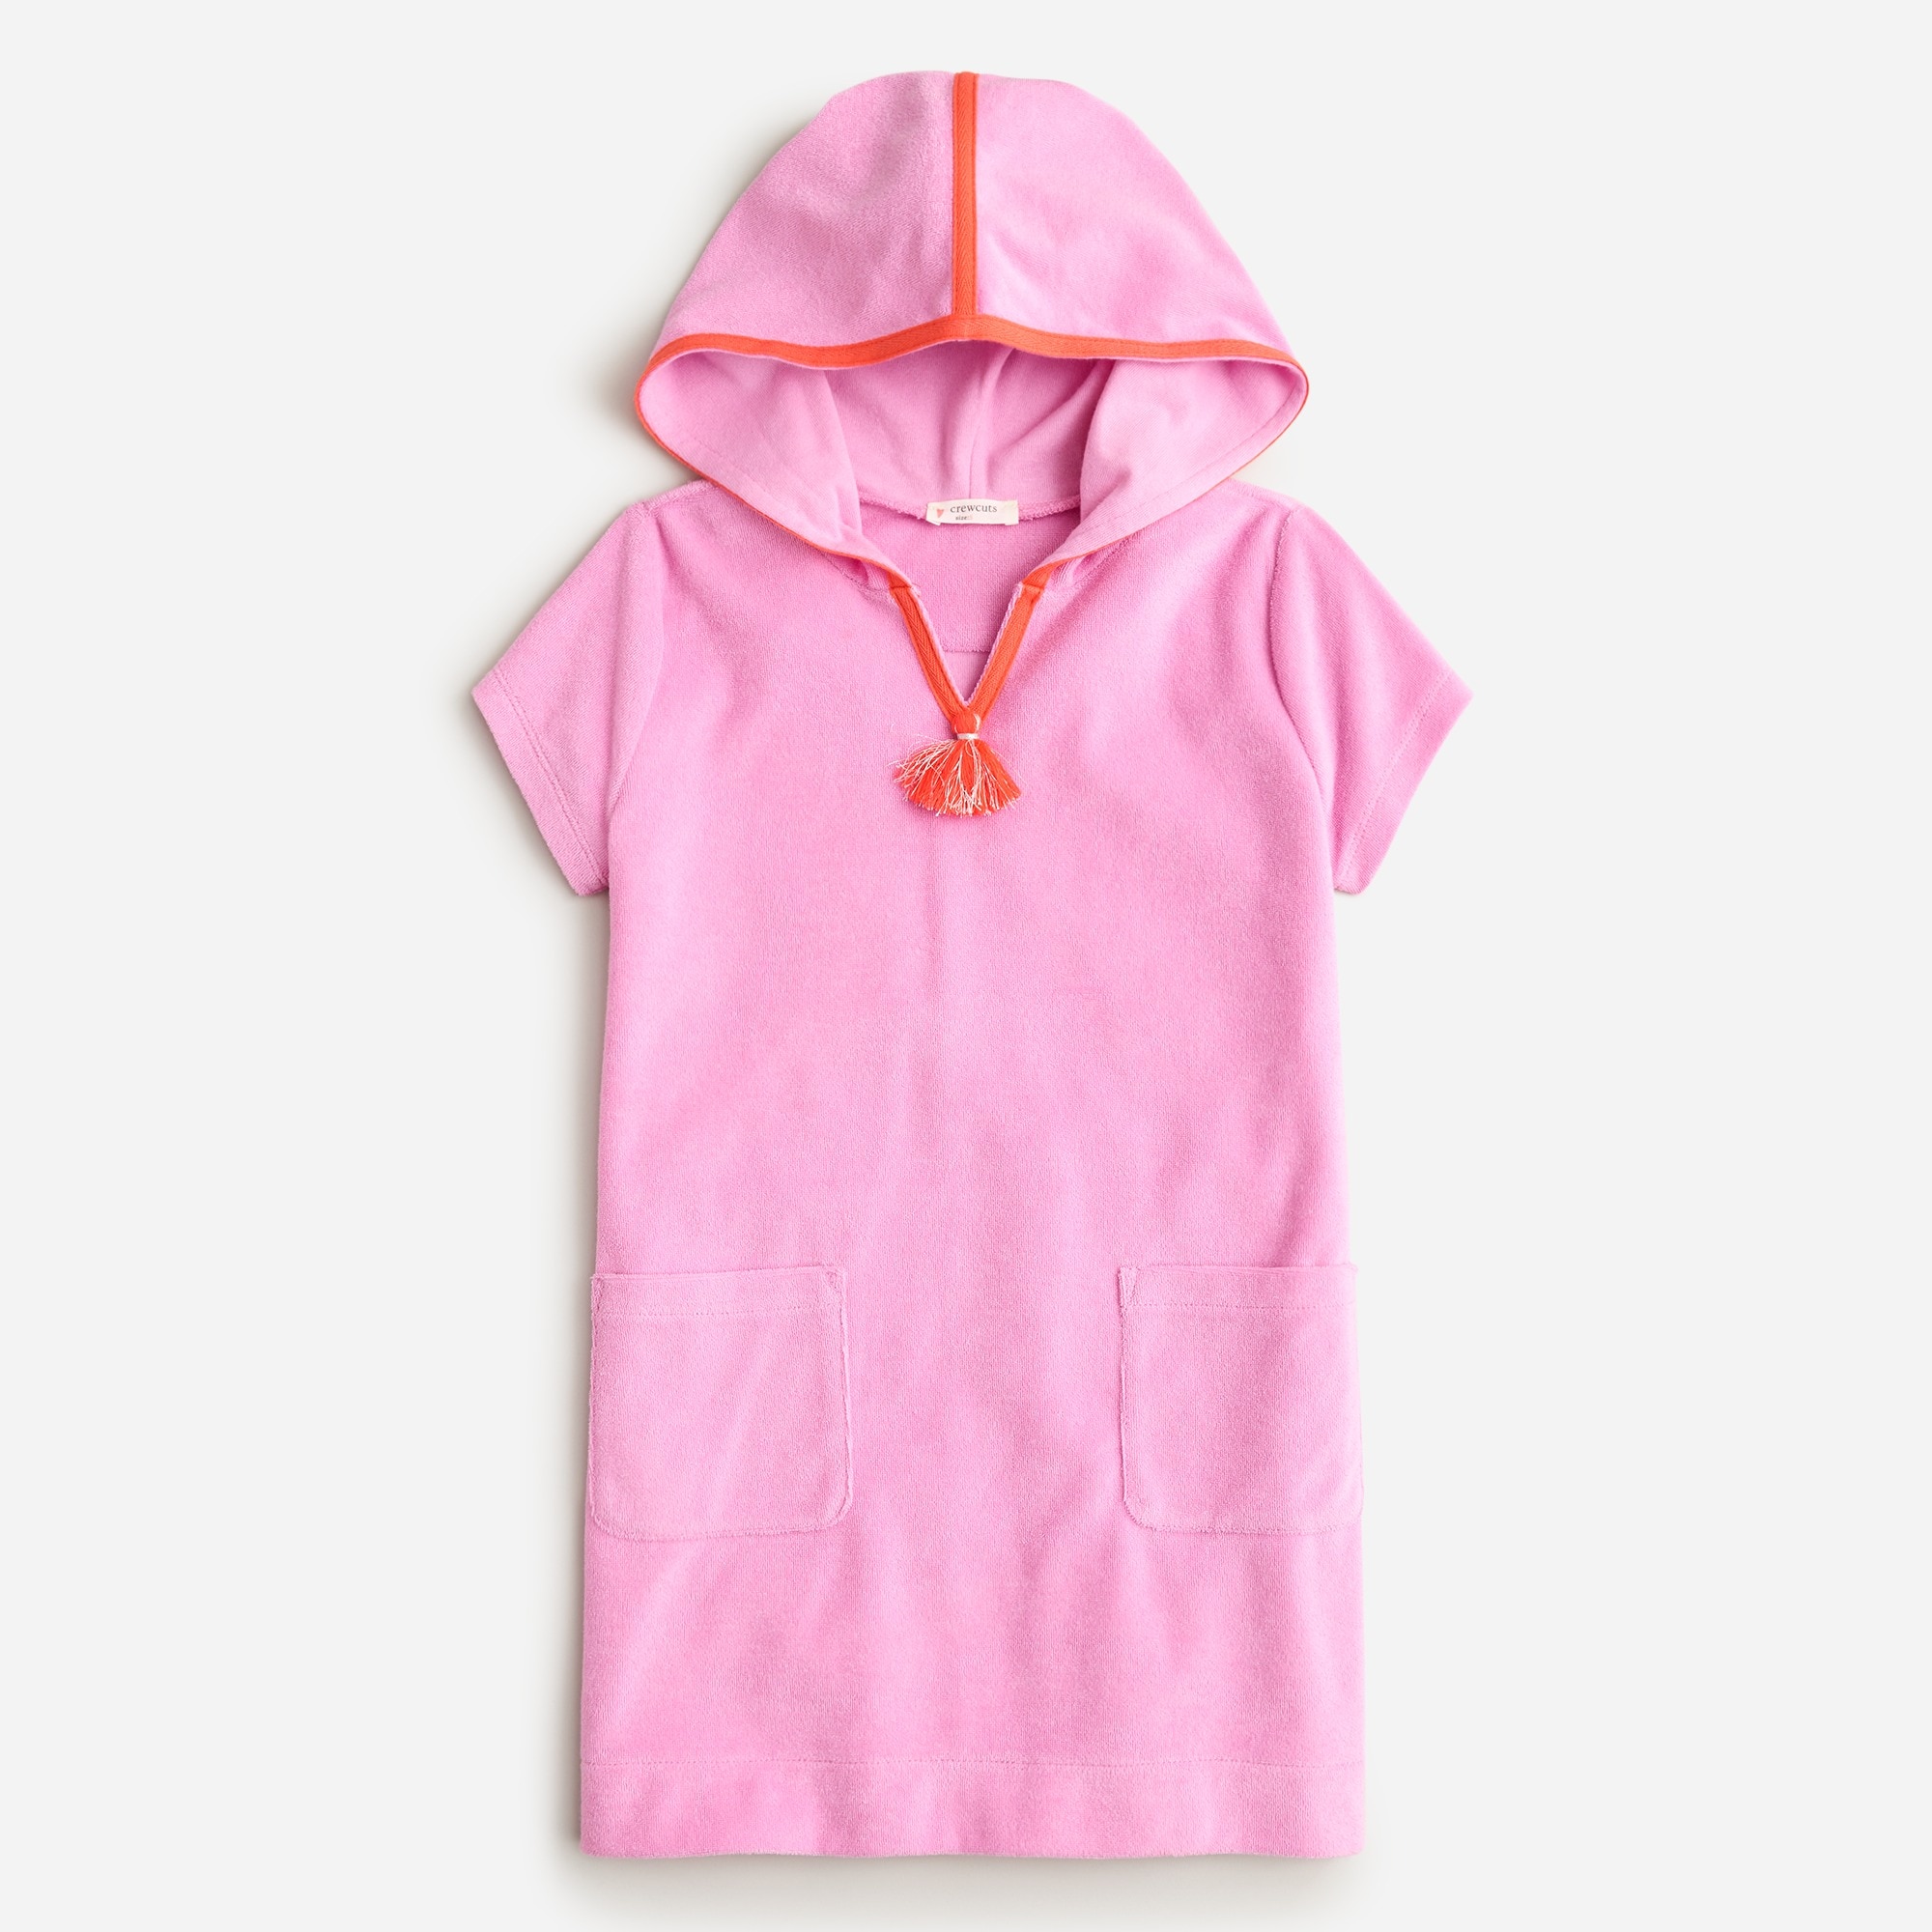  Girls' hooded tunic in towel terry